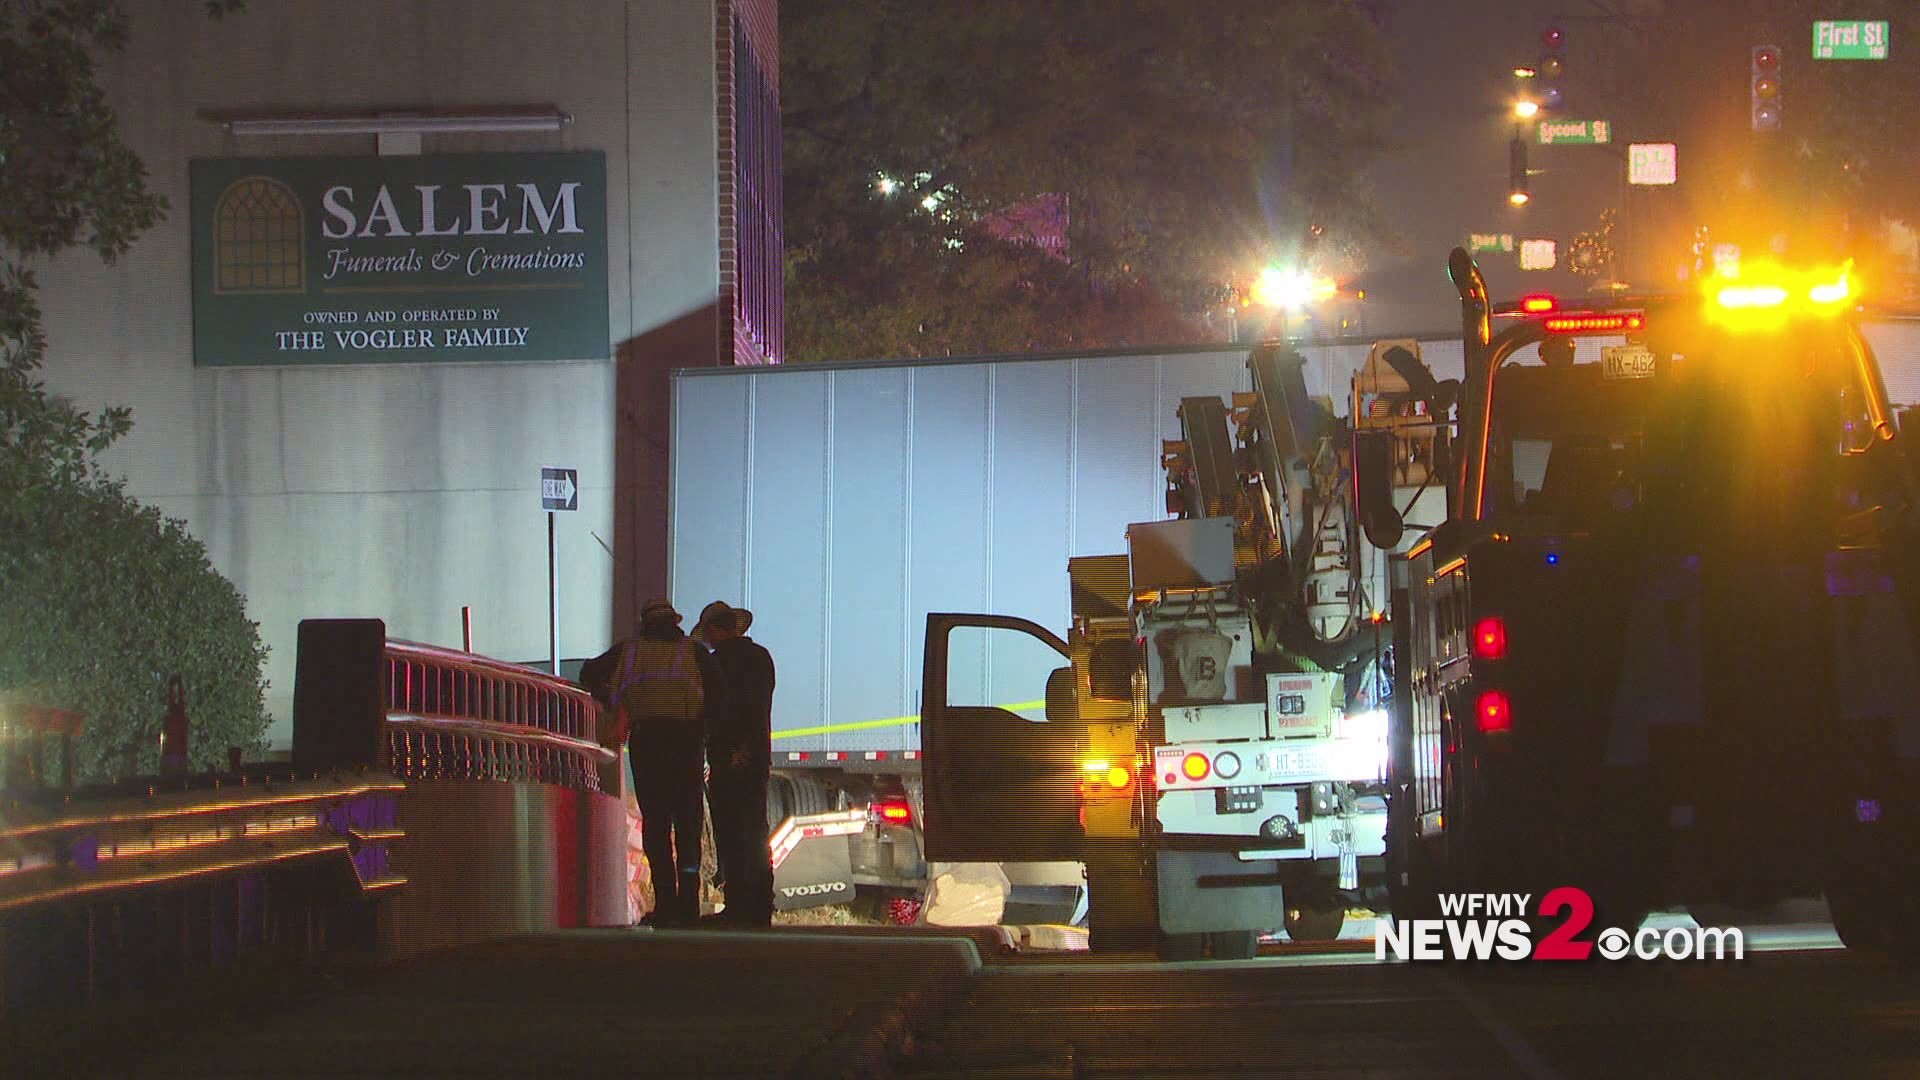 Winston-Salem Fire said the tractor-trailer hit a funeral home and a transformer on South Main Street.